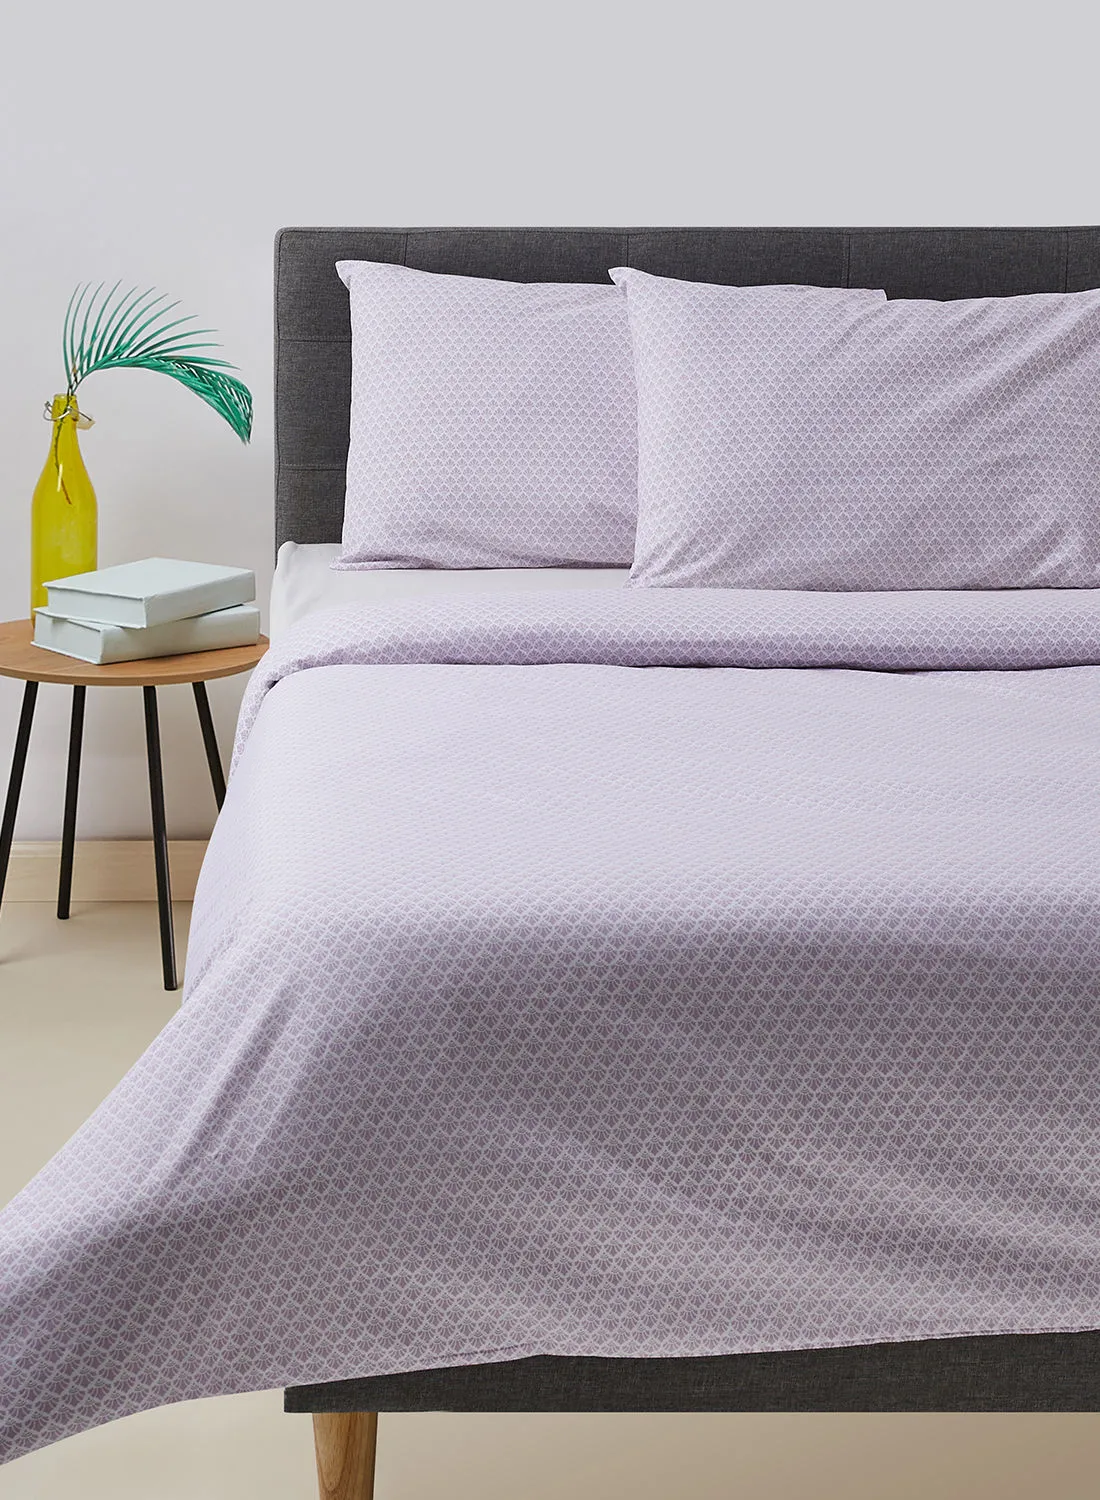 noon east Duvet Cover With Pillow Cover 50X75 Cm, Comforter 200X200 Cm, - For Queen Size Mattress - Lavender Purple 100% Cotton Percale - 180 Thread Count